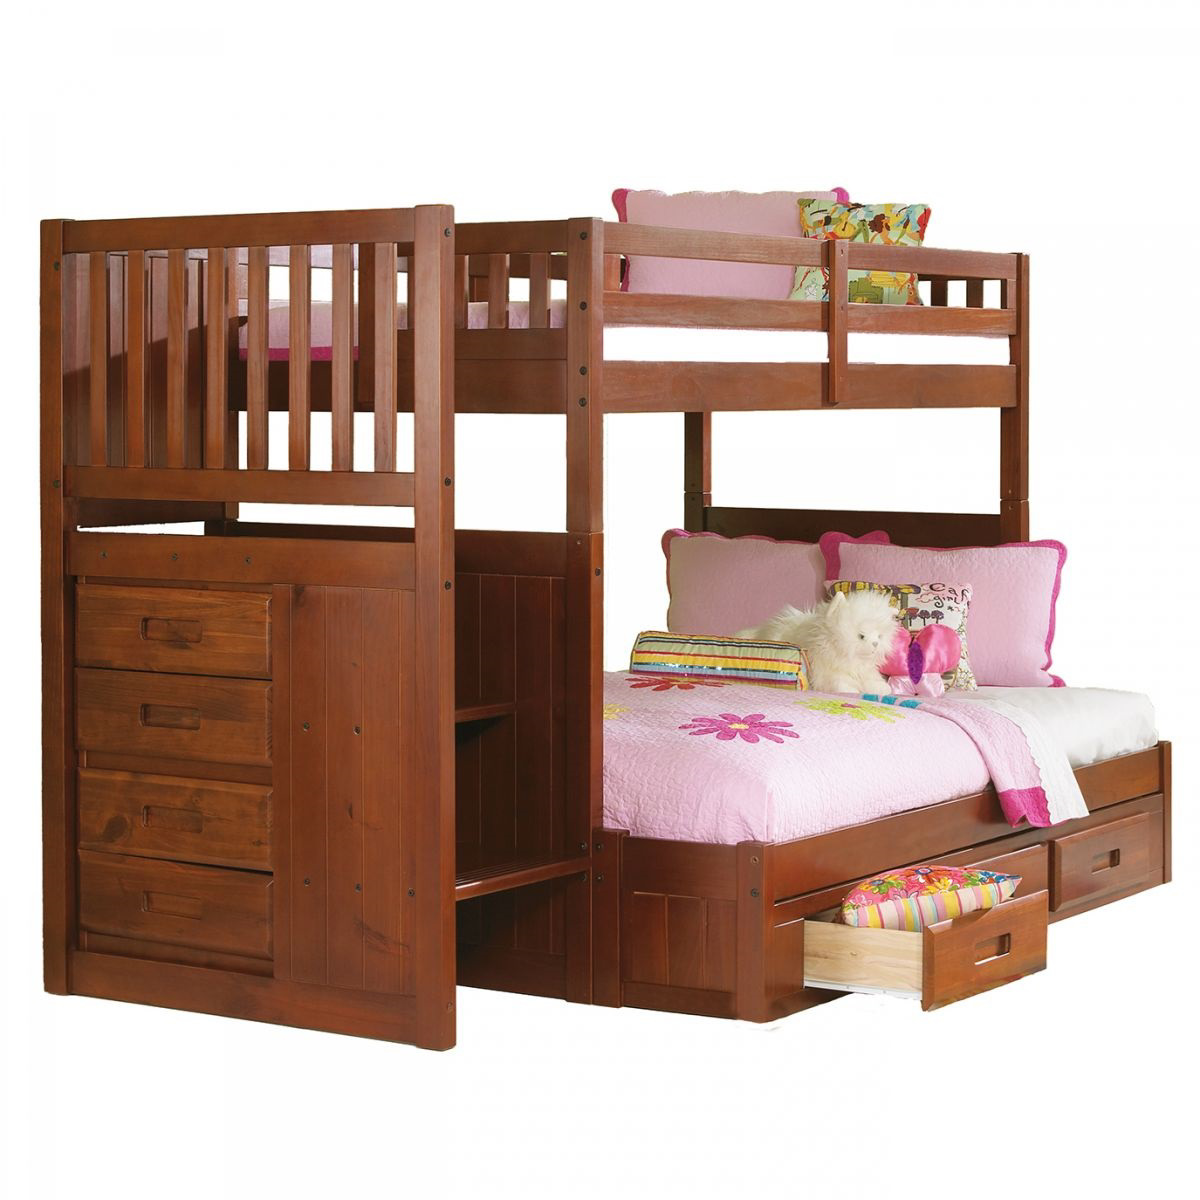 cheapest place to buy bunk beds